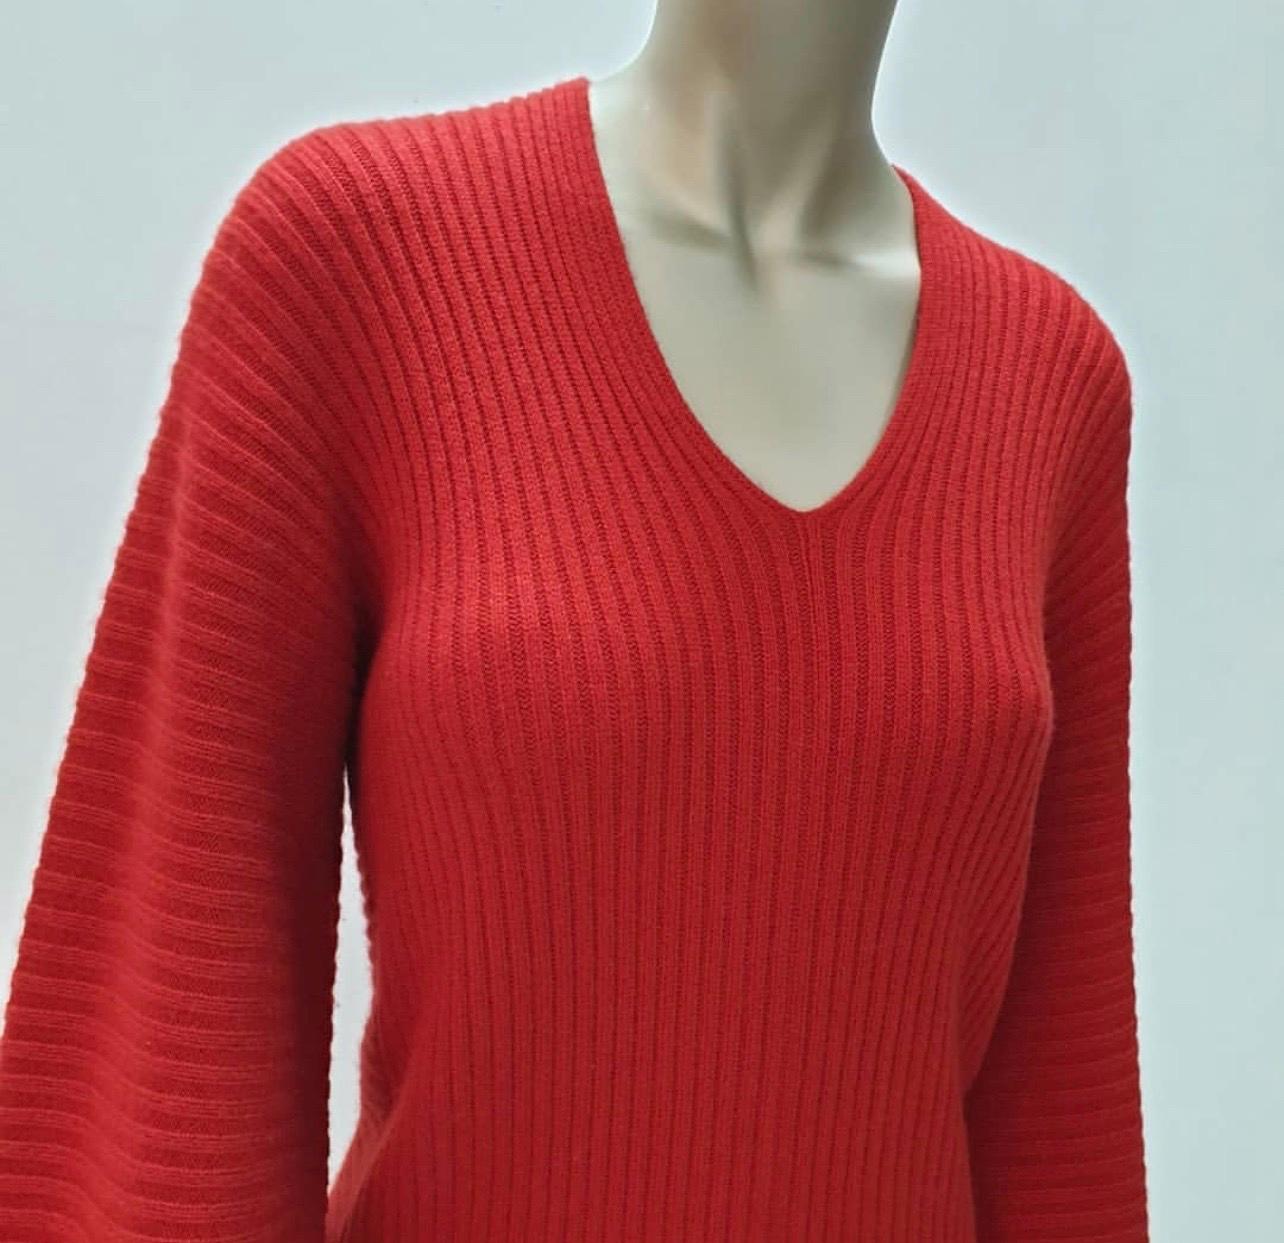 Chanel Red Cashmere Mini Twisted Dress
Total length-80 cm
Sz.36
100% cashmere
Very good condition.
For buyers from EU we can provide shipping from Poland. Please demand if you need.